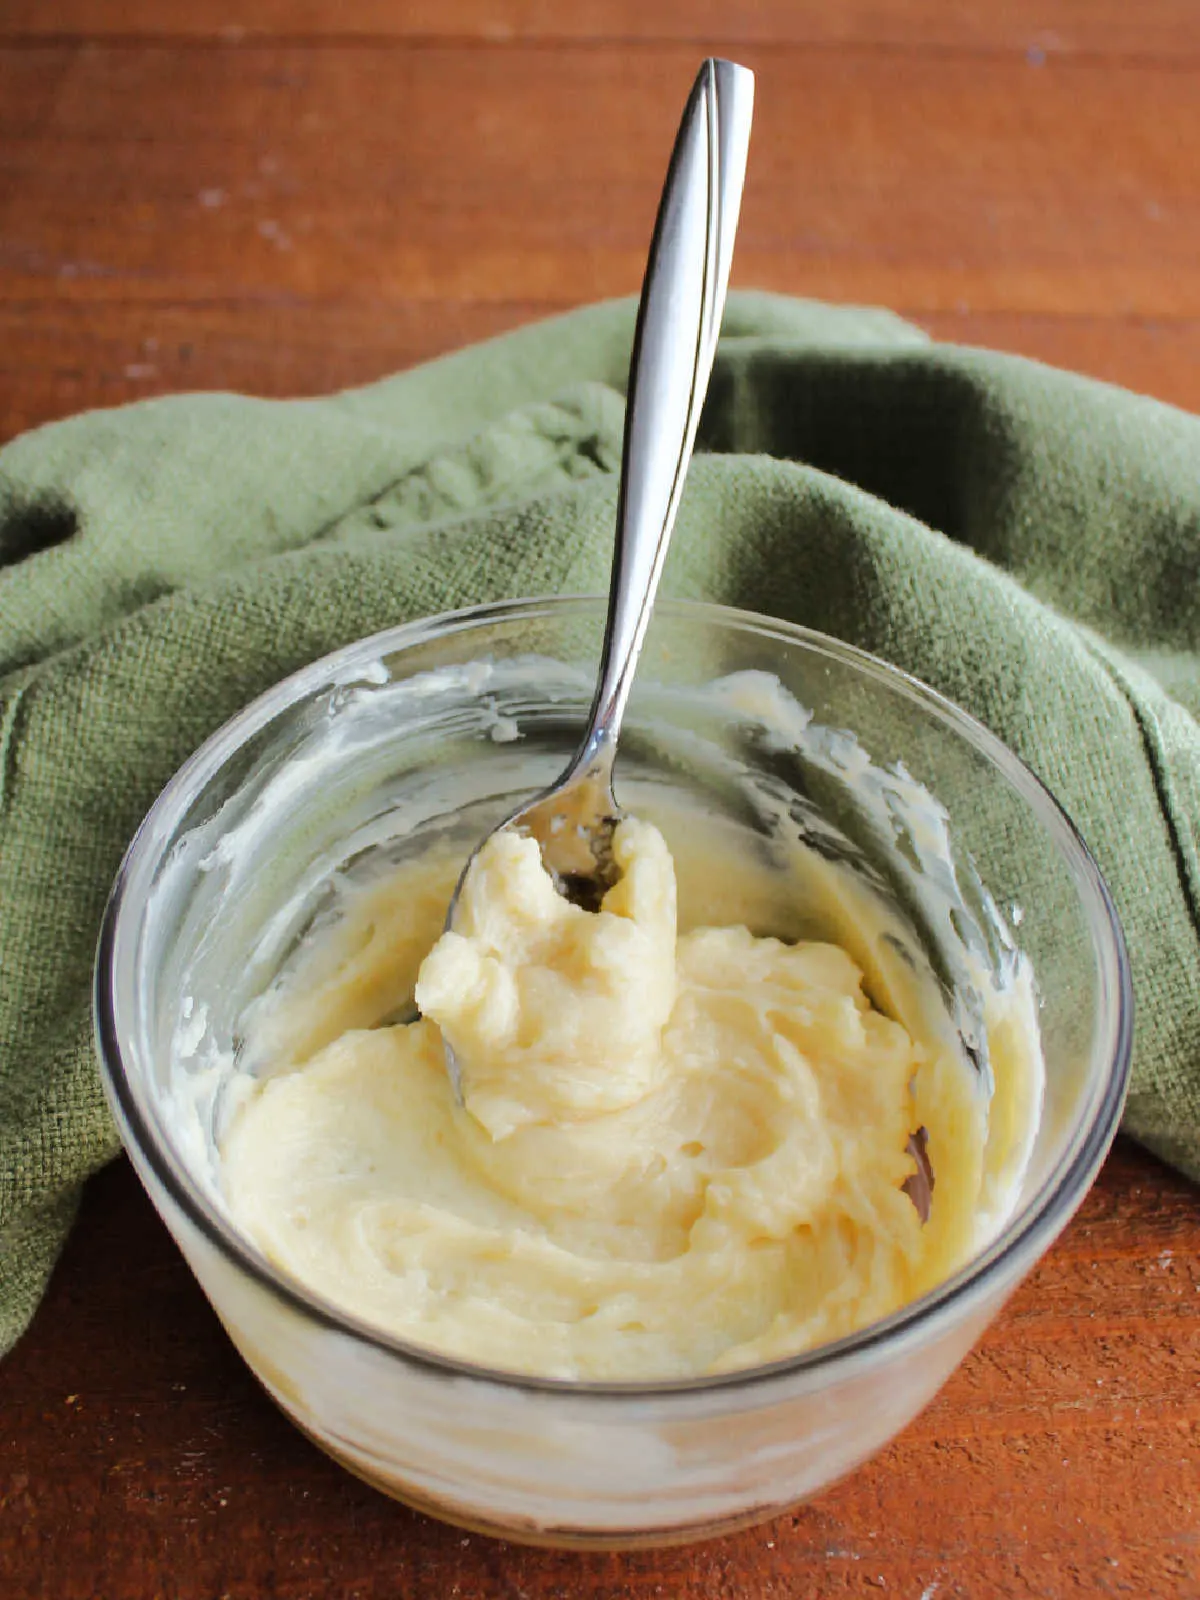 Small glass bowl of vanilla honey butter with spoon, ready to be spread on bread.